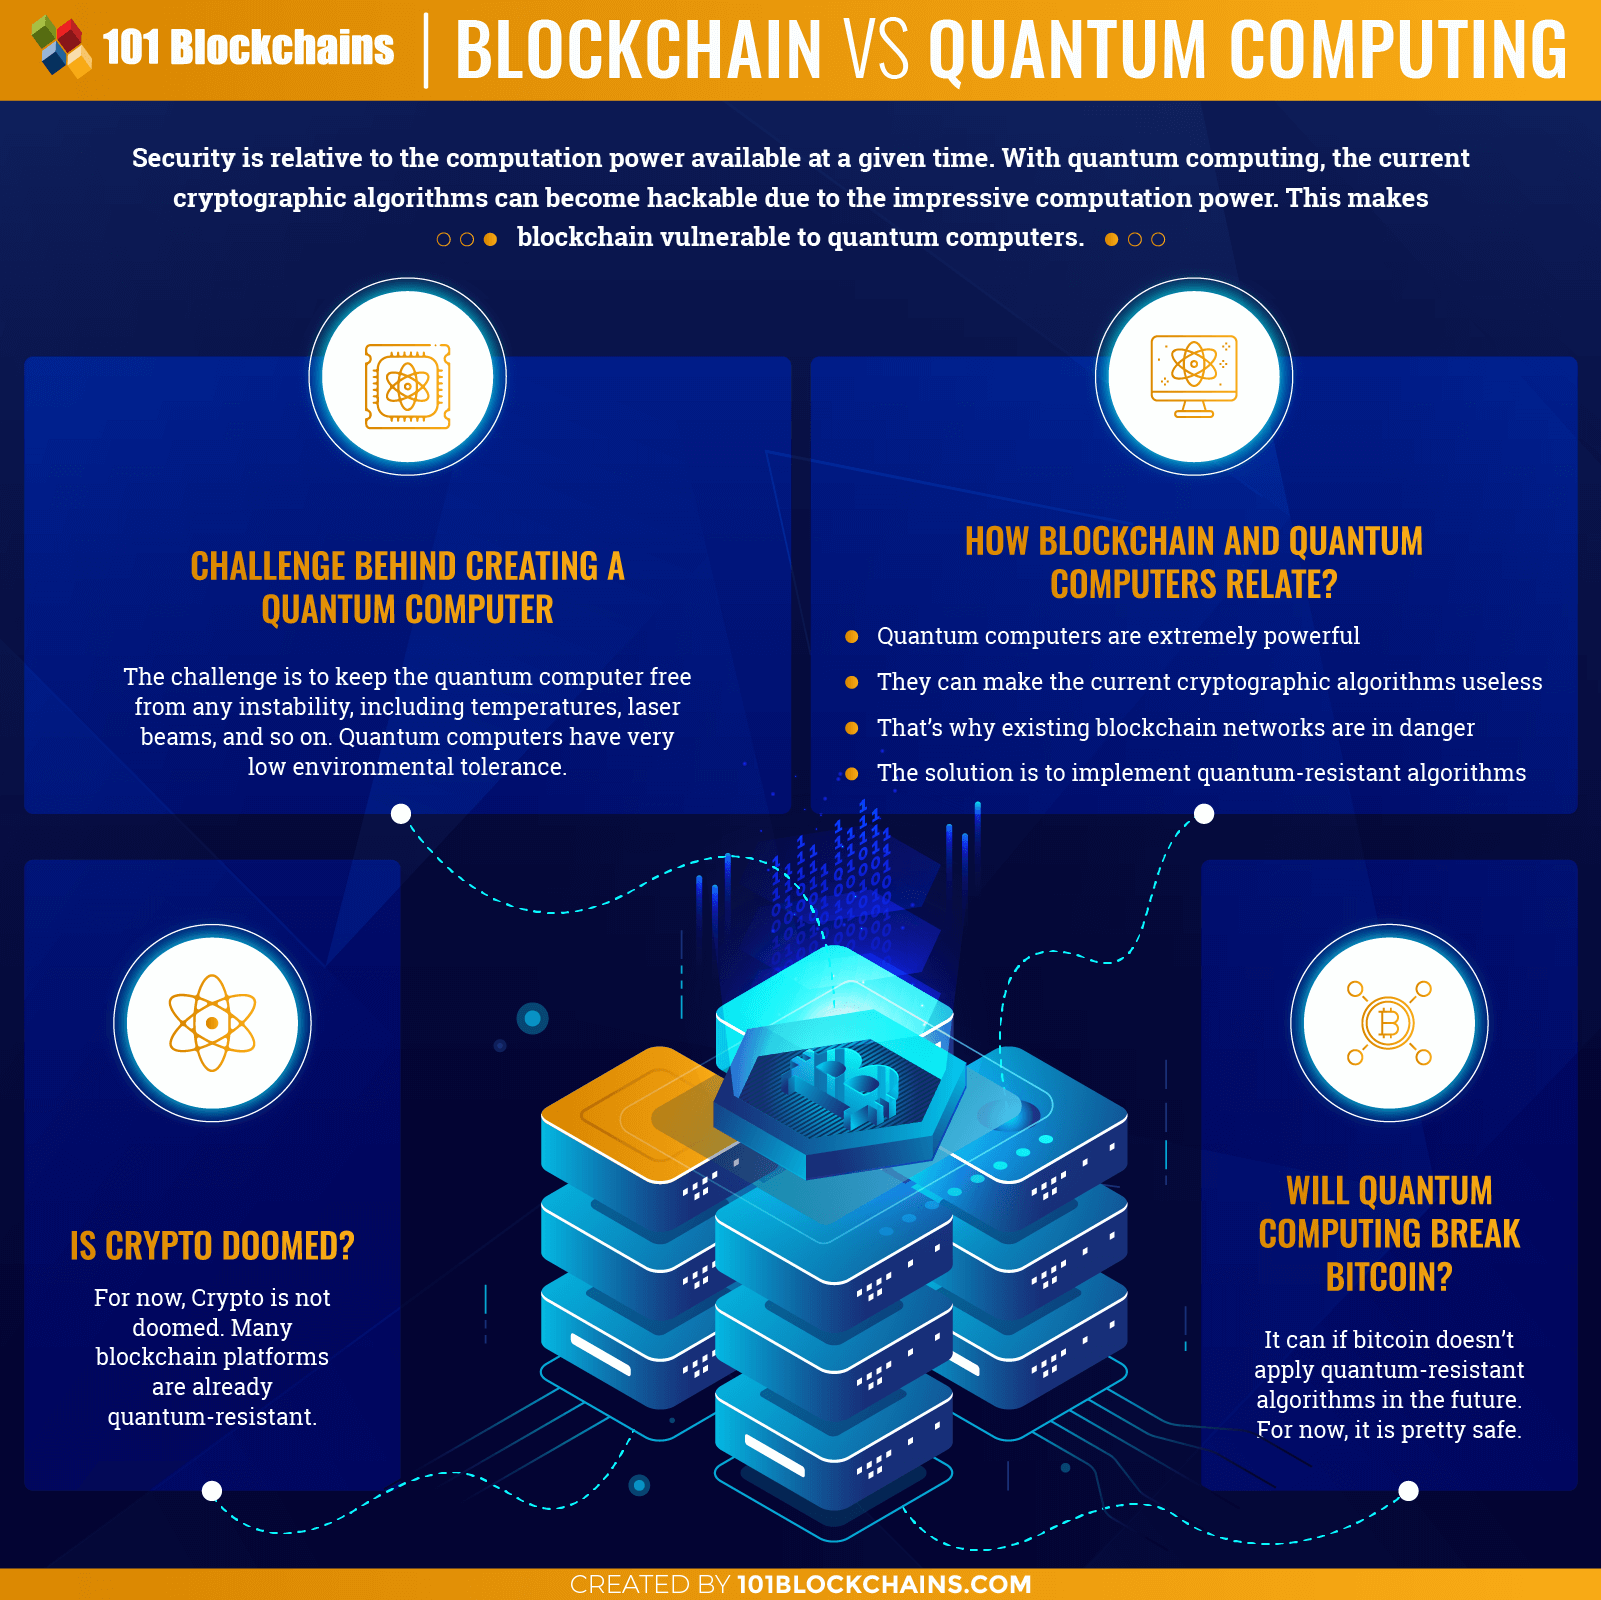 Quantum Computing With AI and Blockchain: The Future of IT